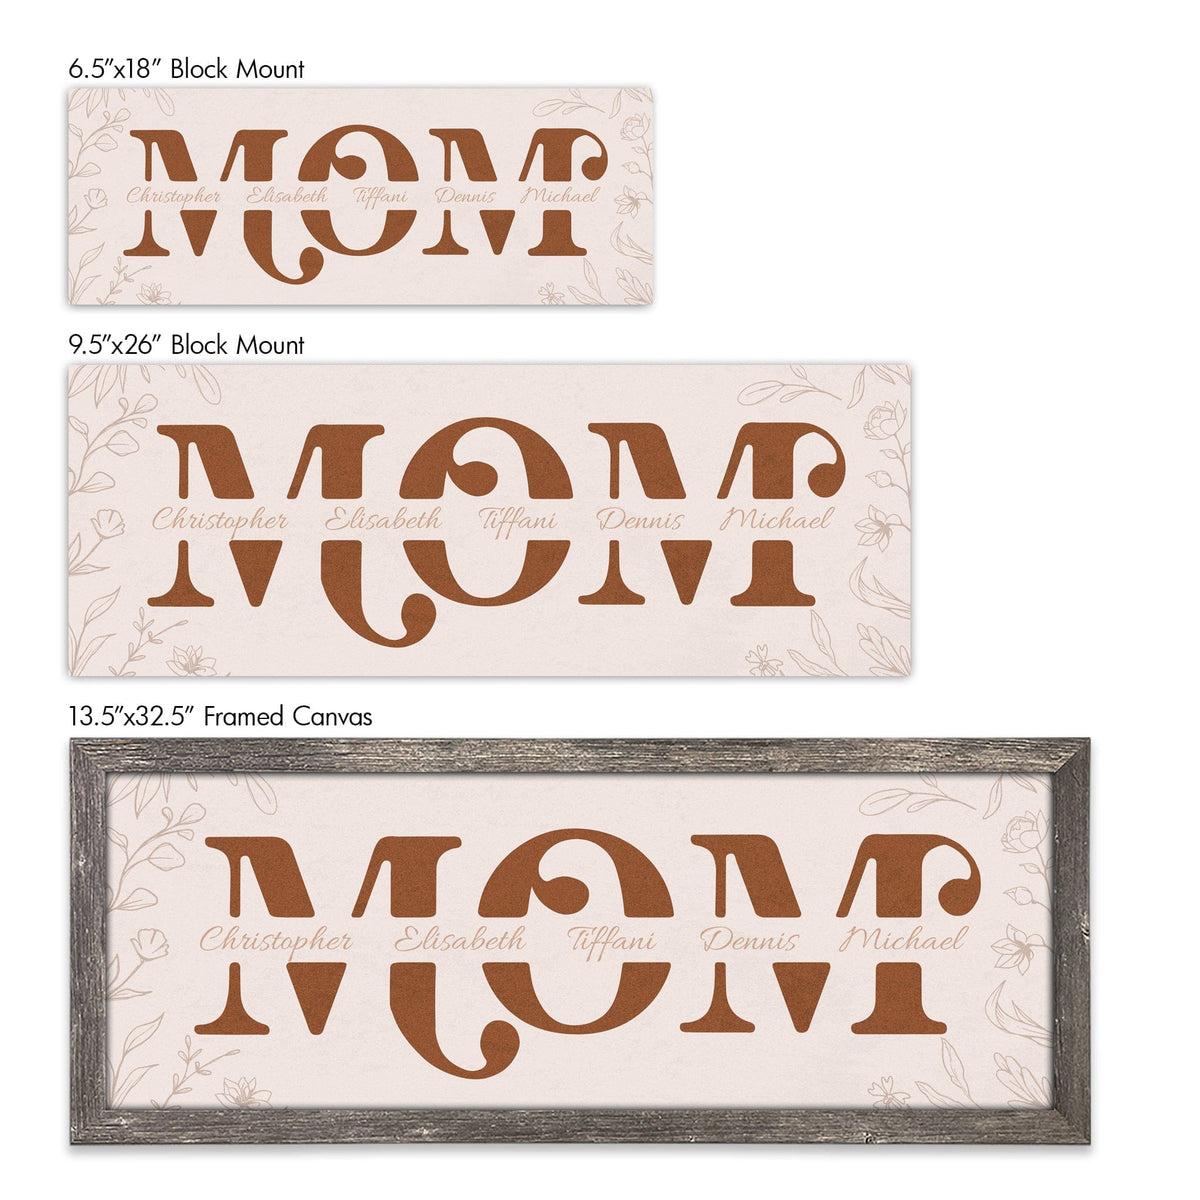 Personalized Gifts for mom - Size chart